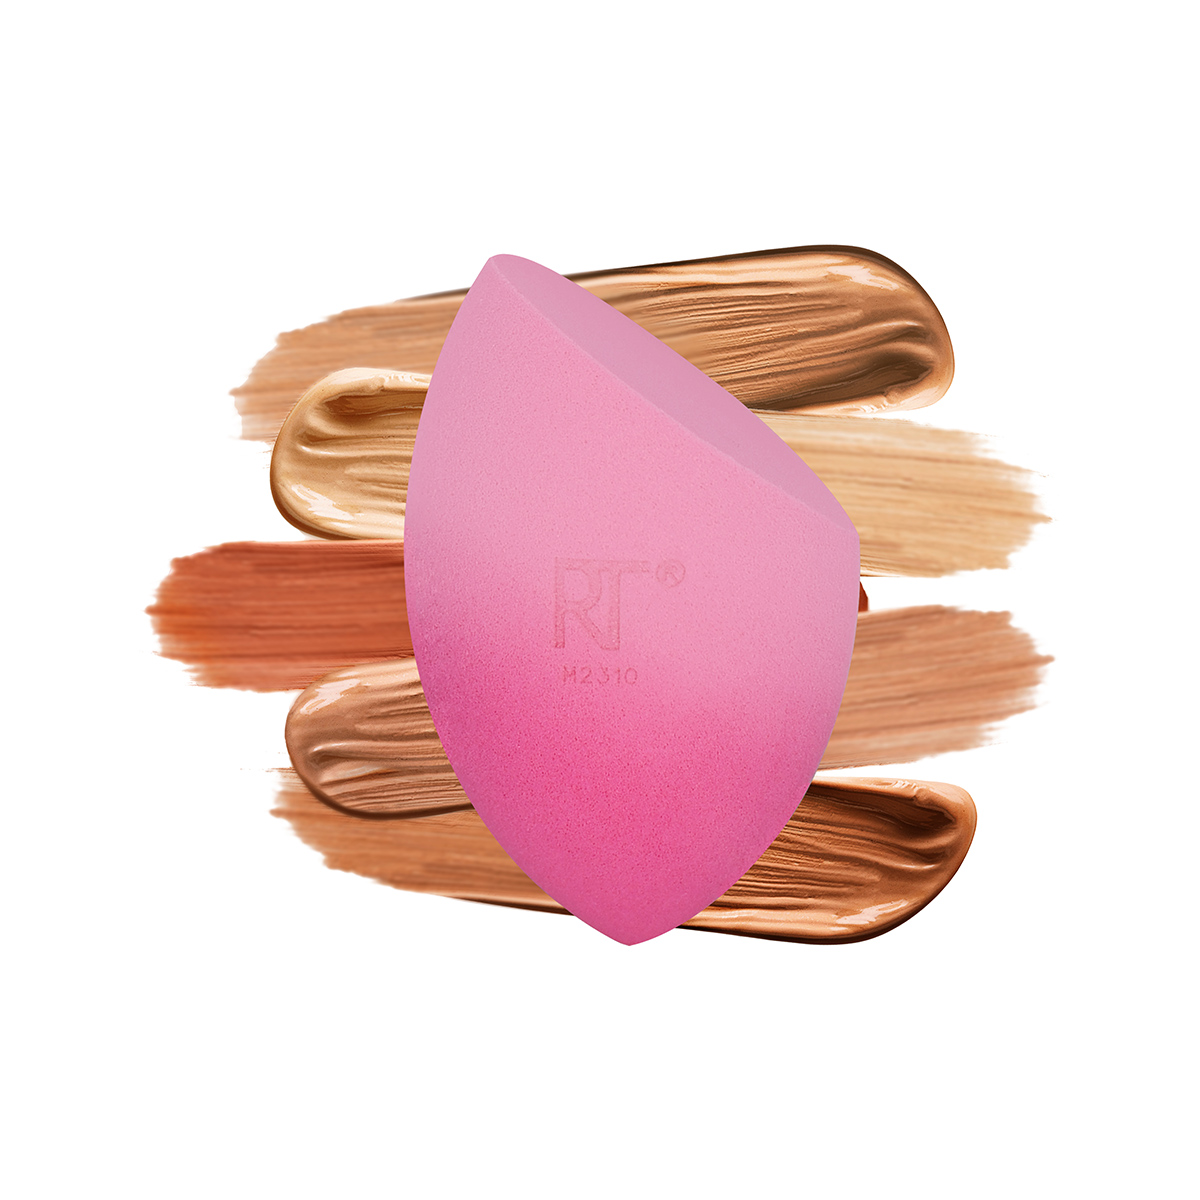 Спонж для макияжа Real Techniques Love IRL Limited edition 2 Miracle Complexion Sponge 